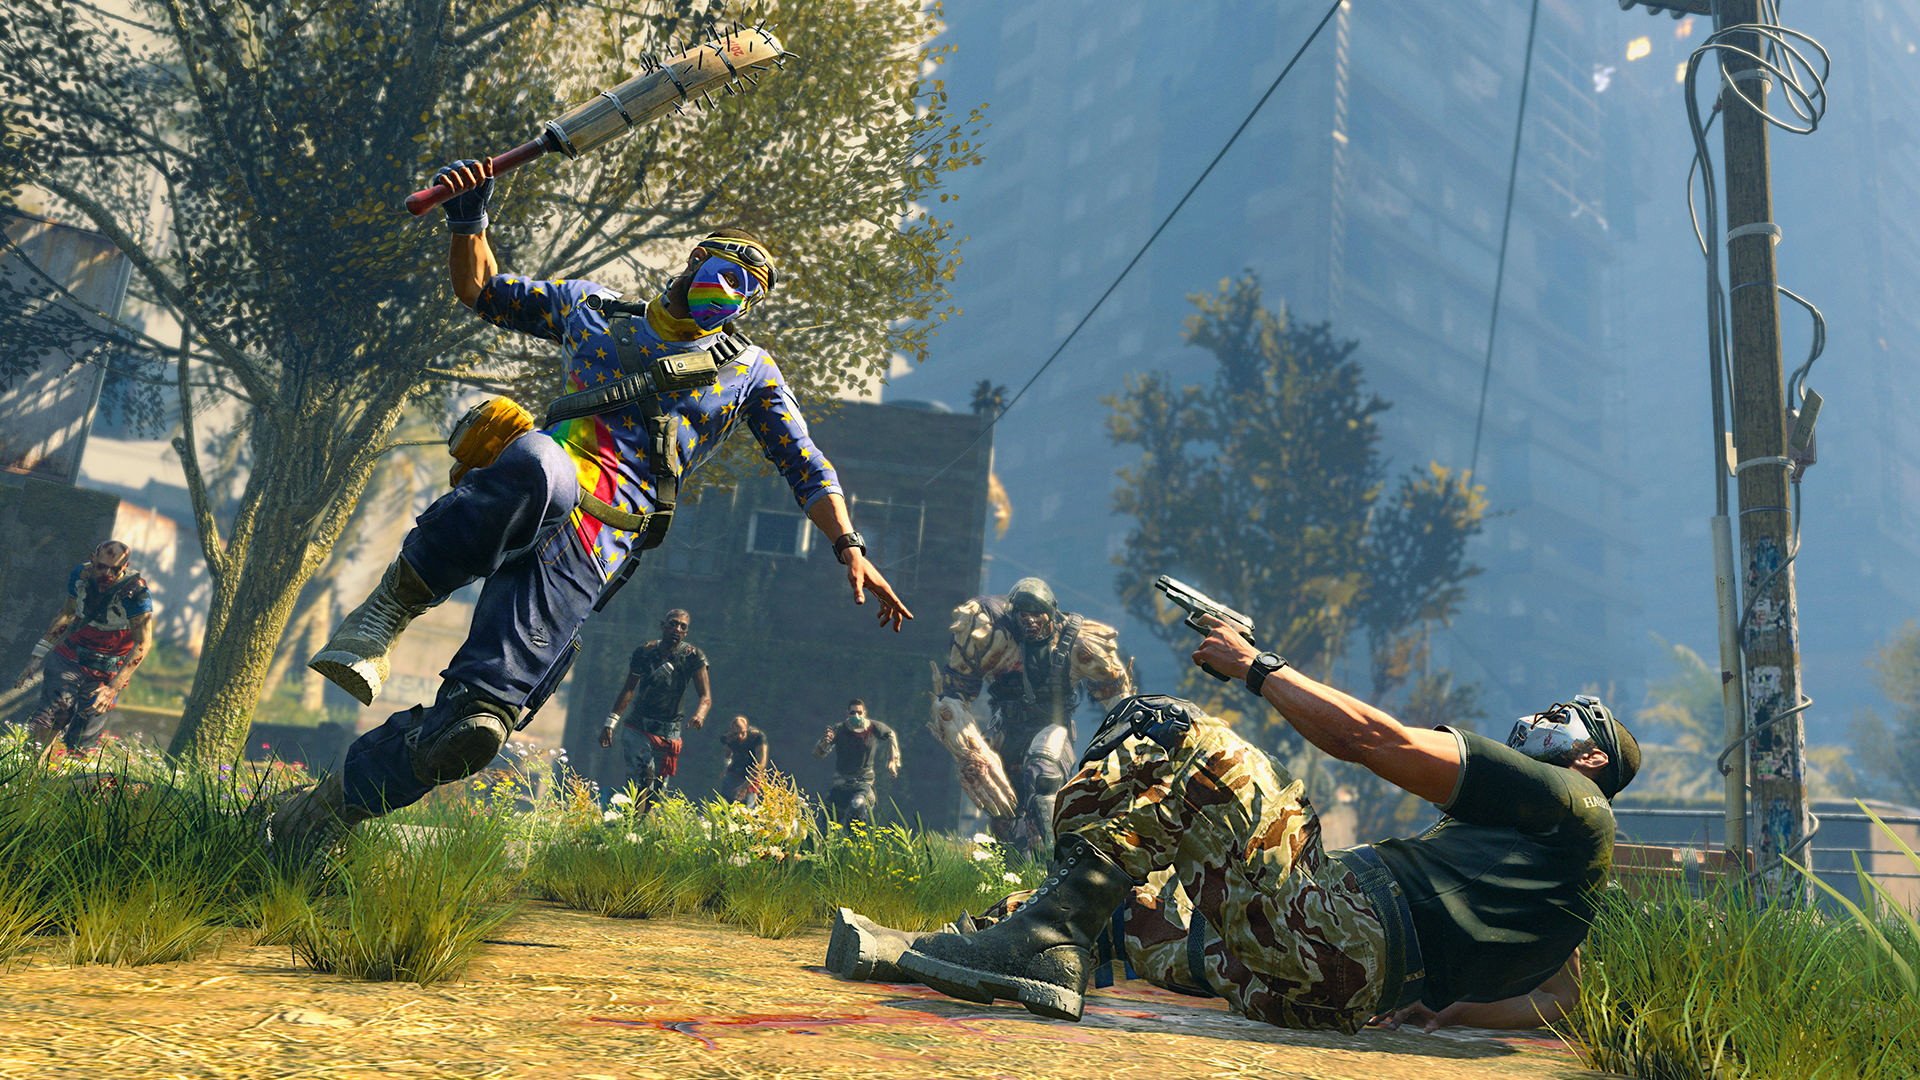 PS4 version of Dying Light will run in 1080p and 30fps